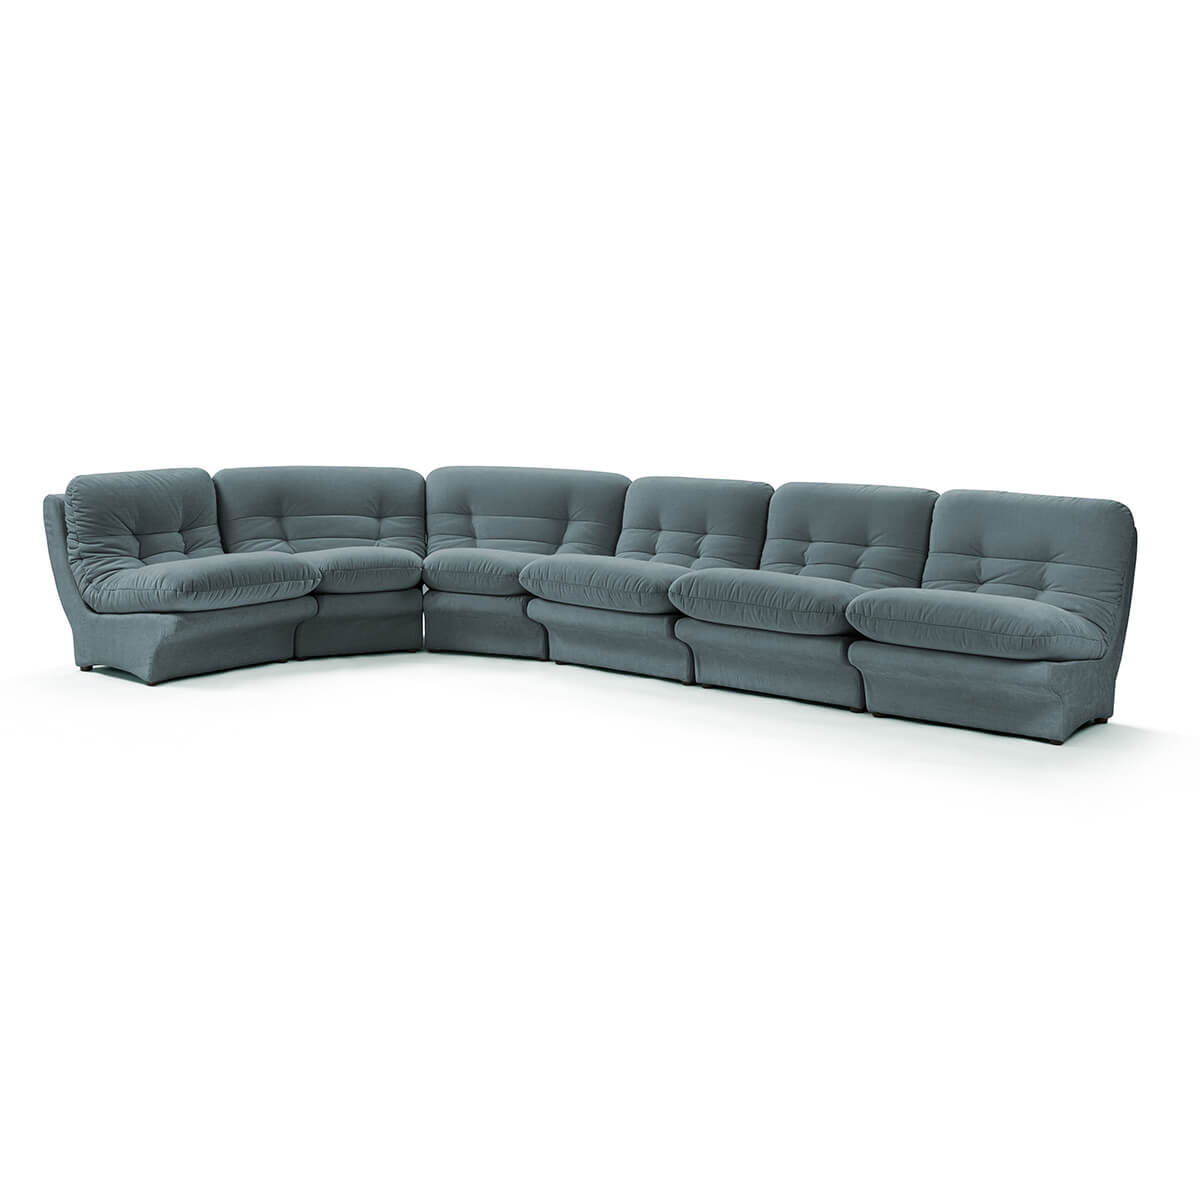 Carsons Mid Century Curved Modular Sectional Sofa / Combination 003 Chenille Helios-Cerulean Blue